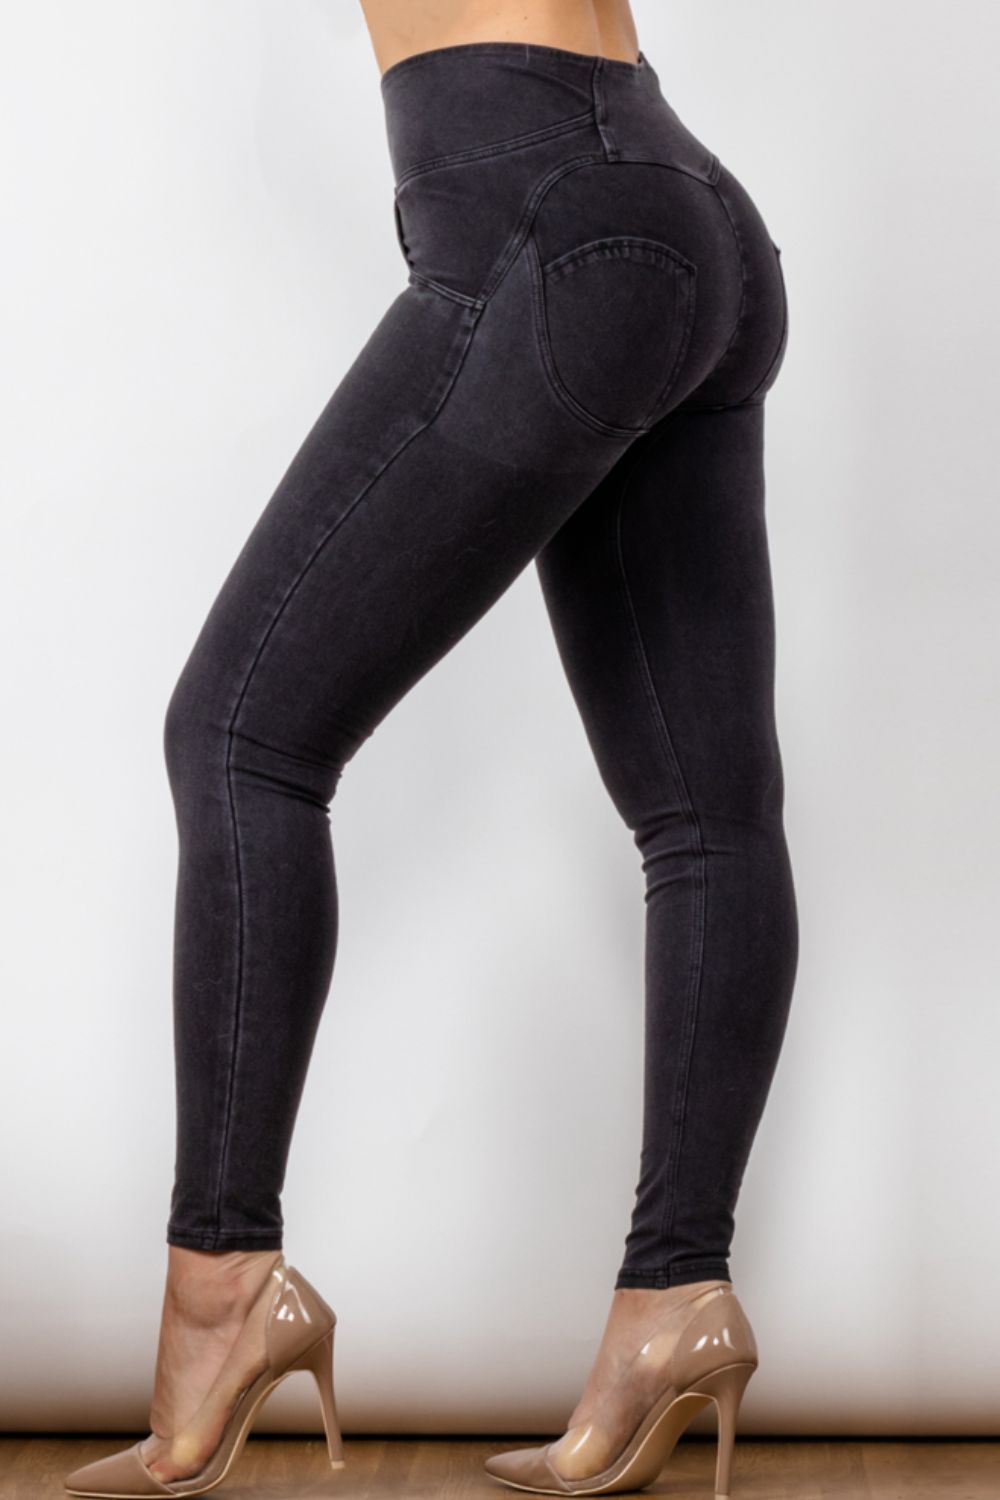 High Waist Skinny Long Jeans - Jeans - FITGGINS